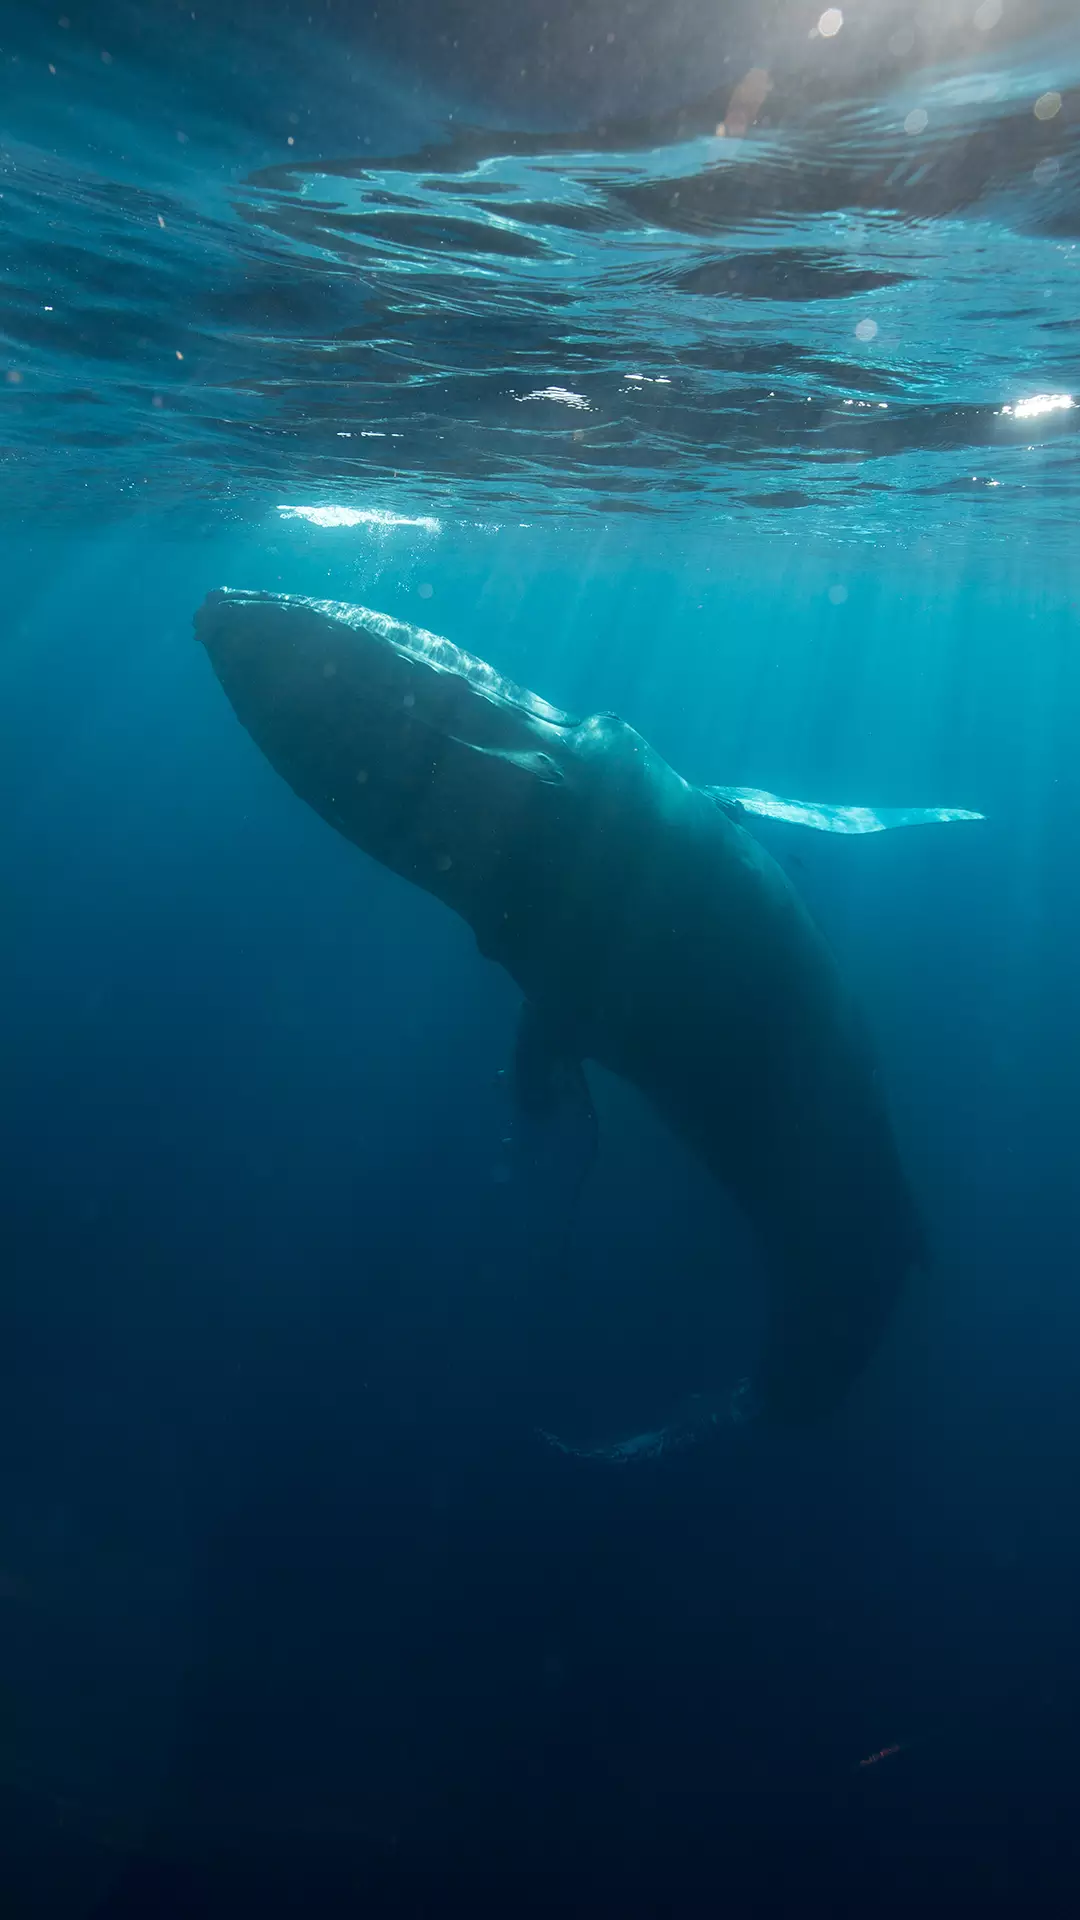 The Blue Whale | The Wildlife